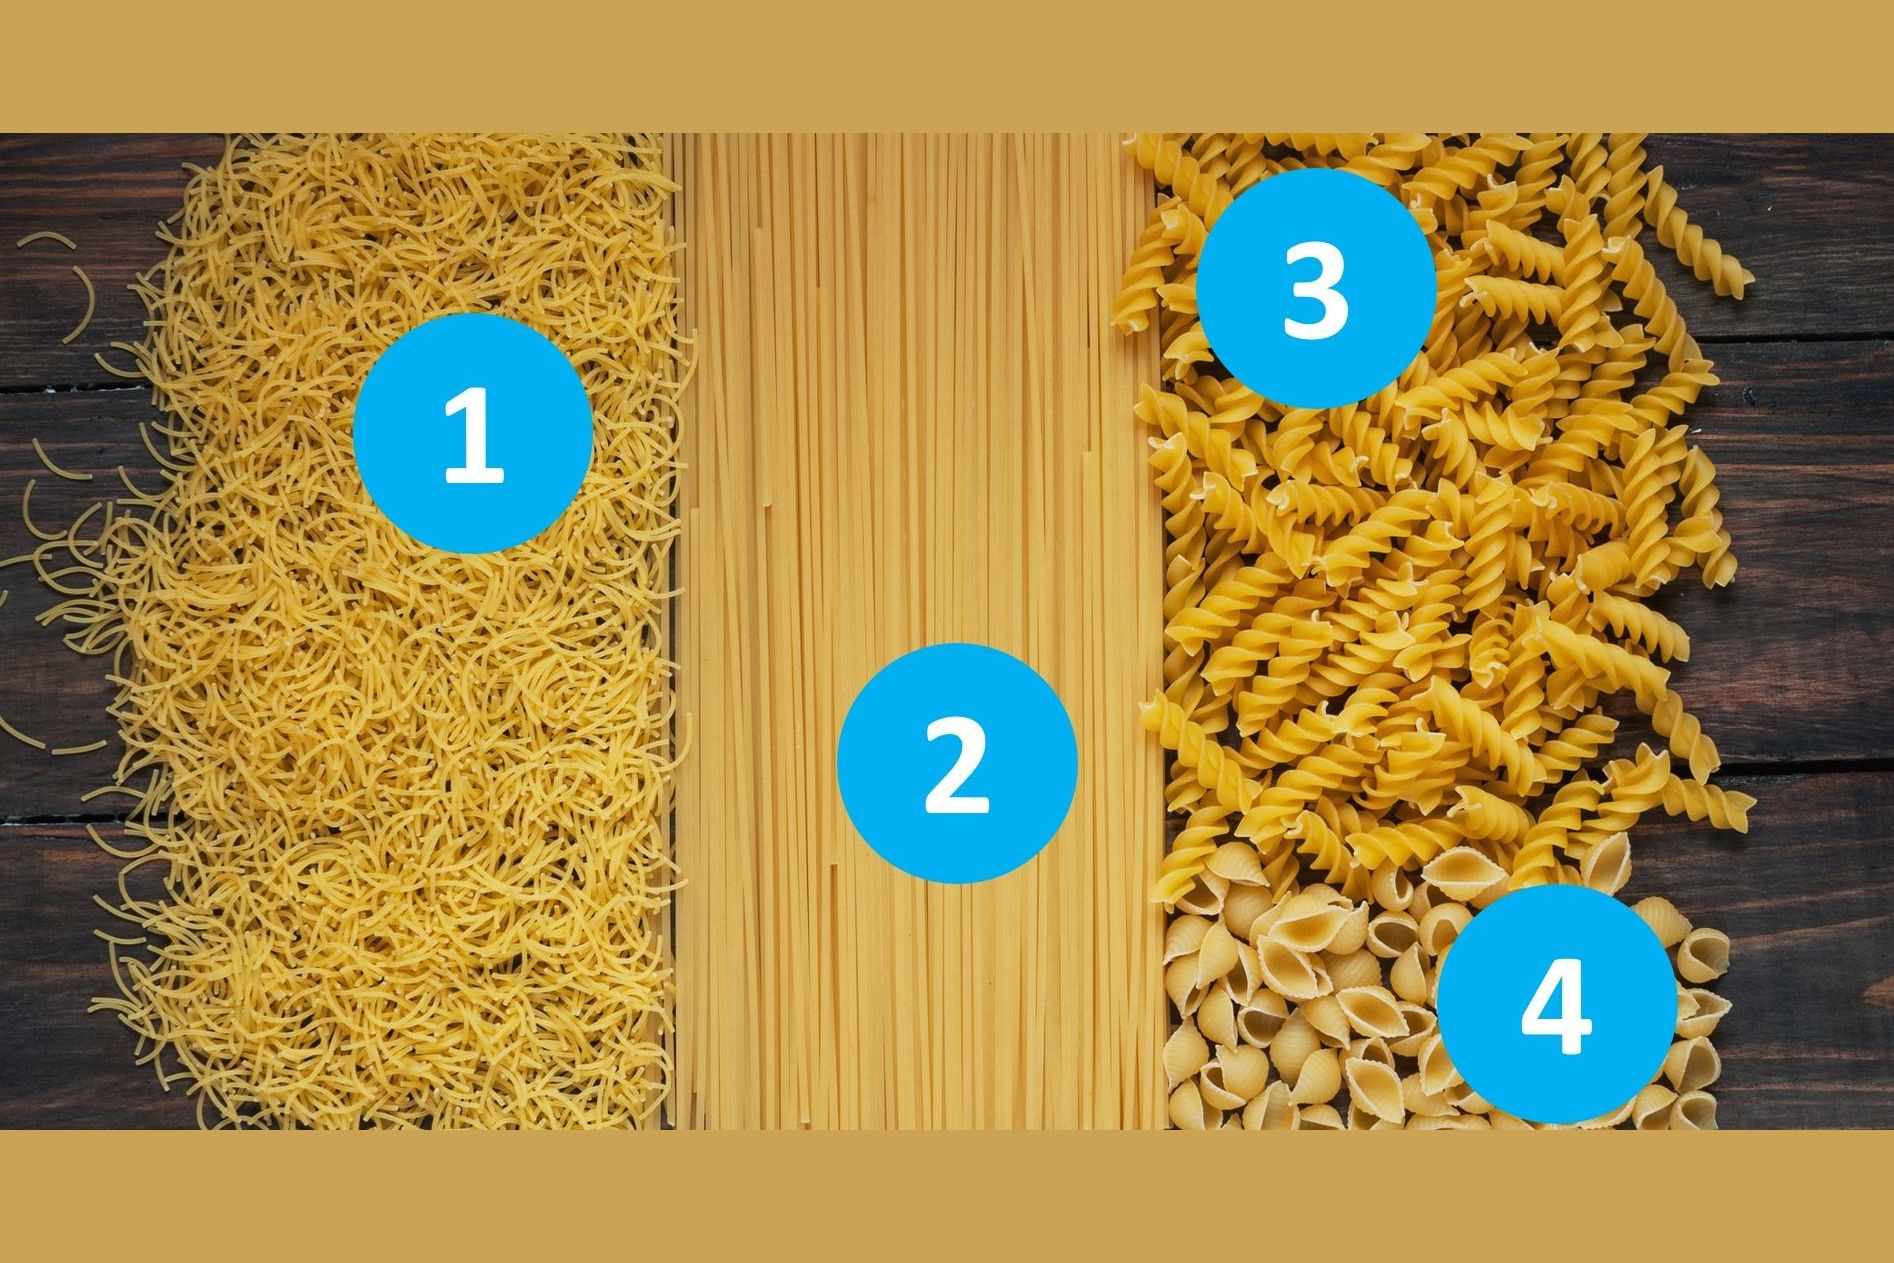 Can You Name 44 Different Kinds Of Pasta?